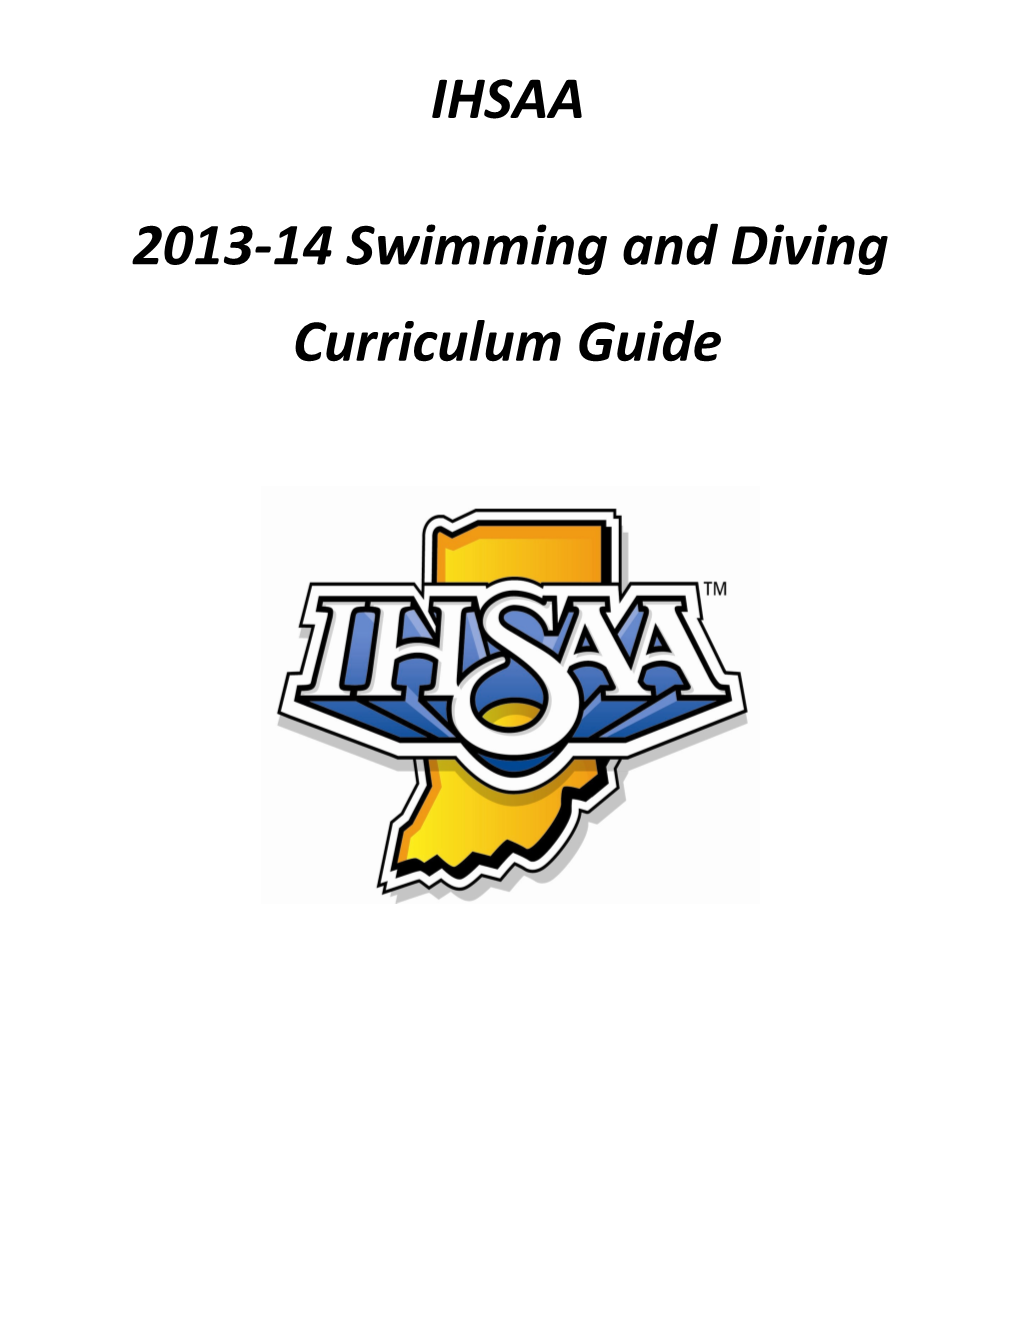 Session 1NFHS Rules /IHSAA Modifications